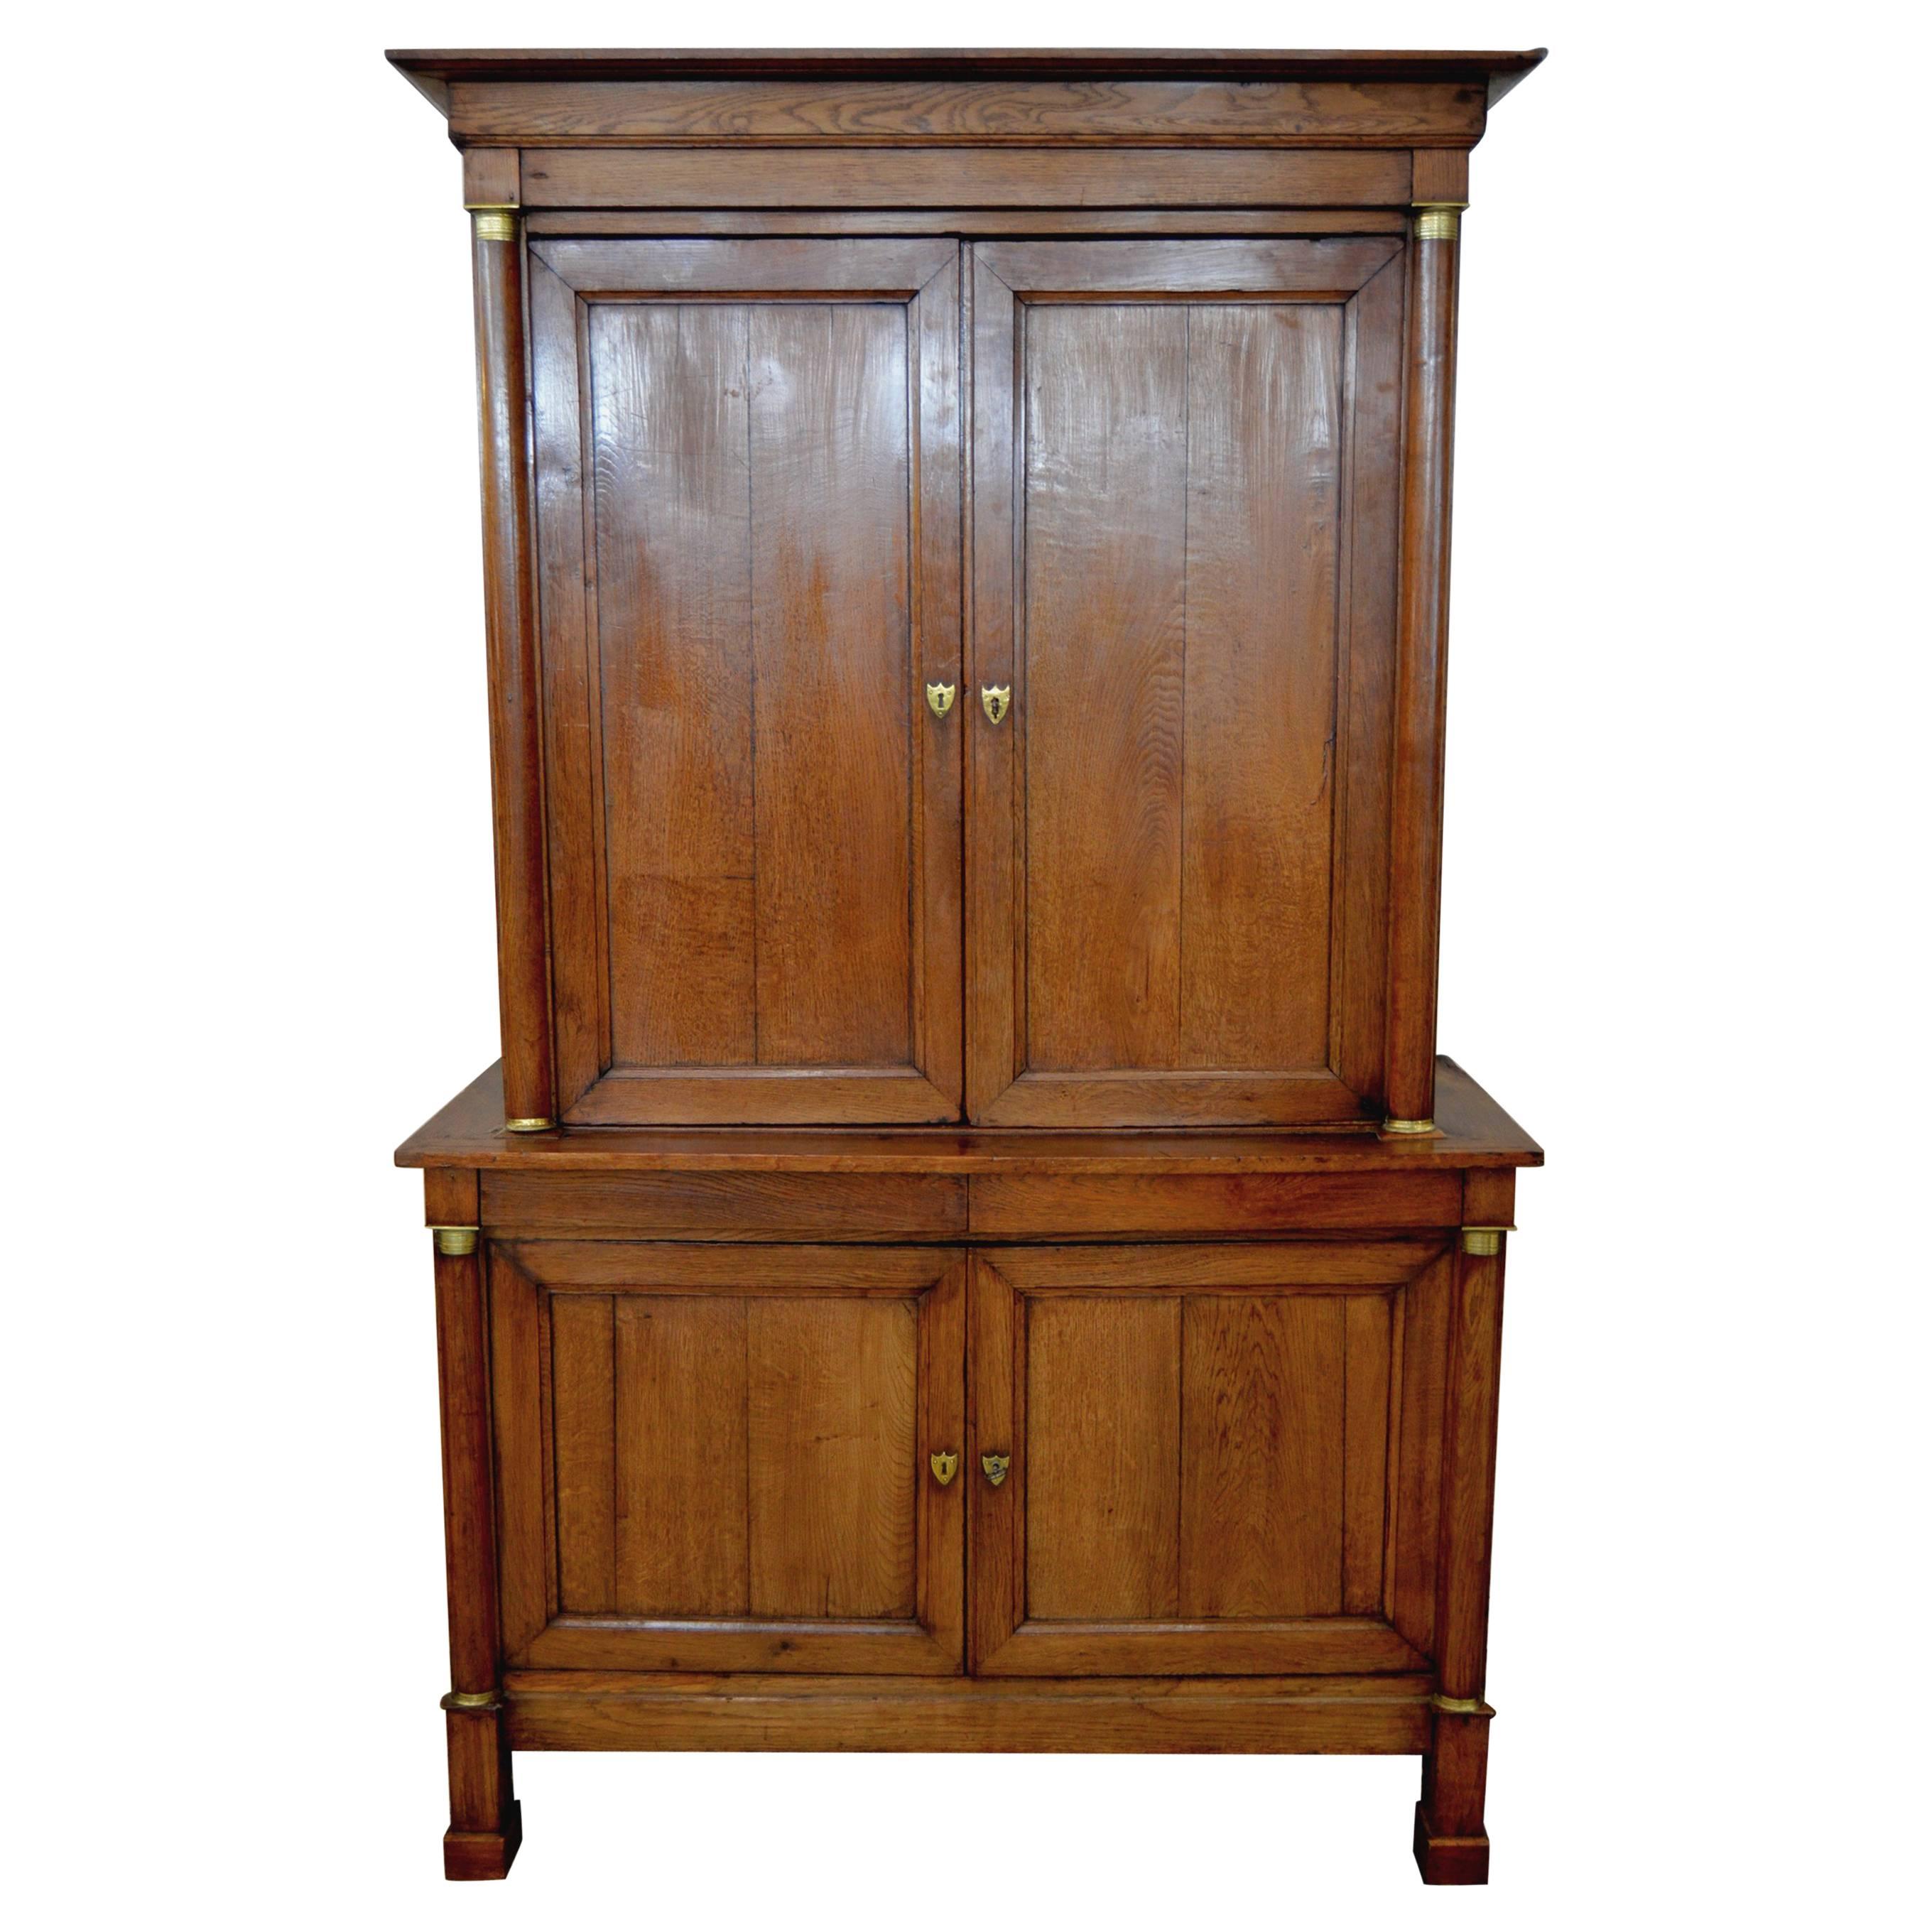 French Empire Period Cabinet "Deux-Corps"